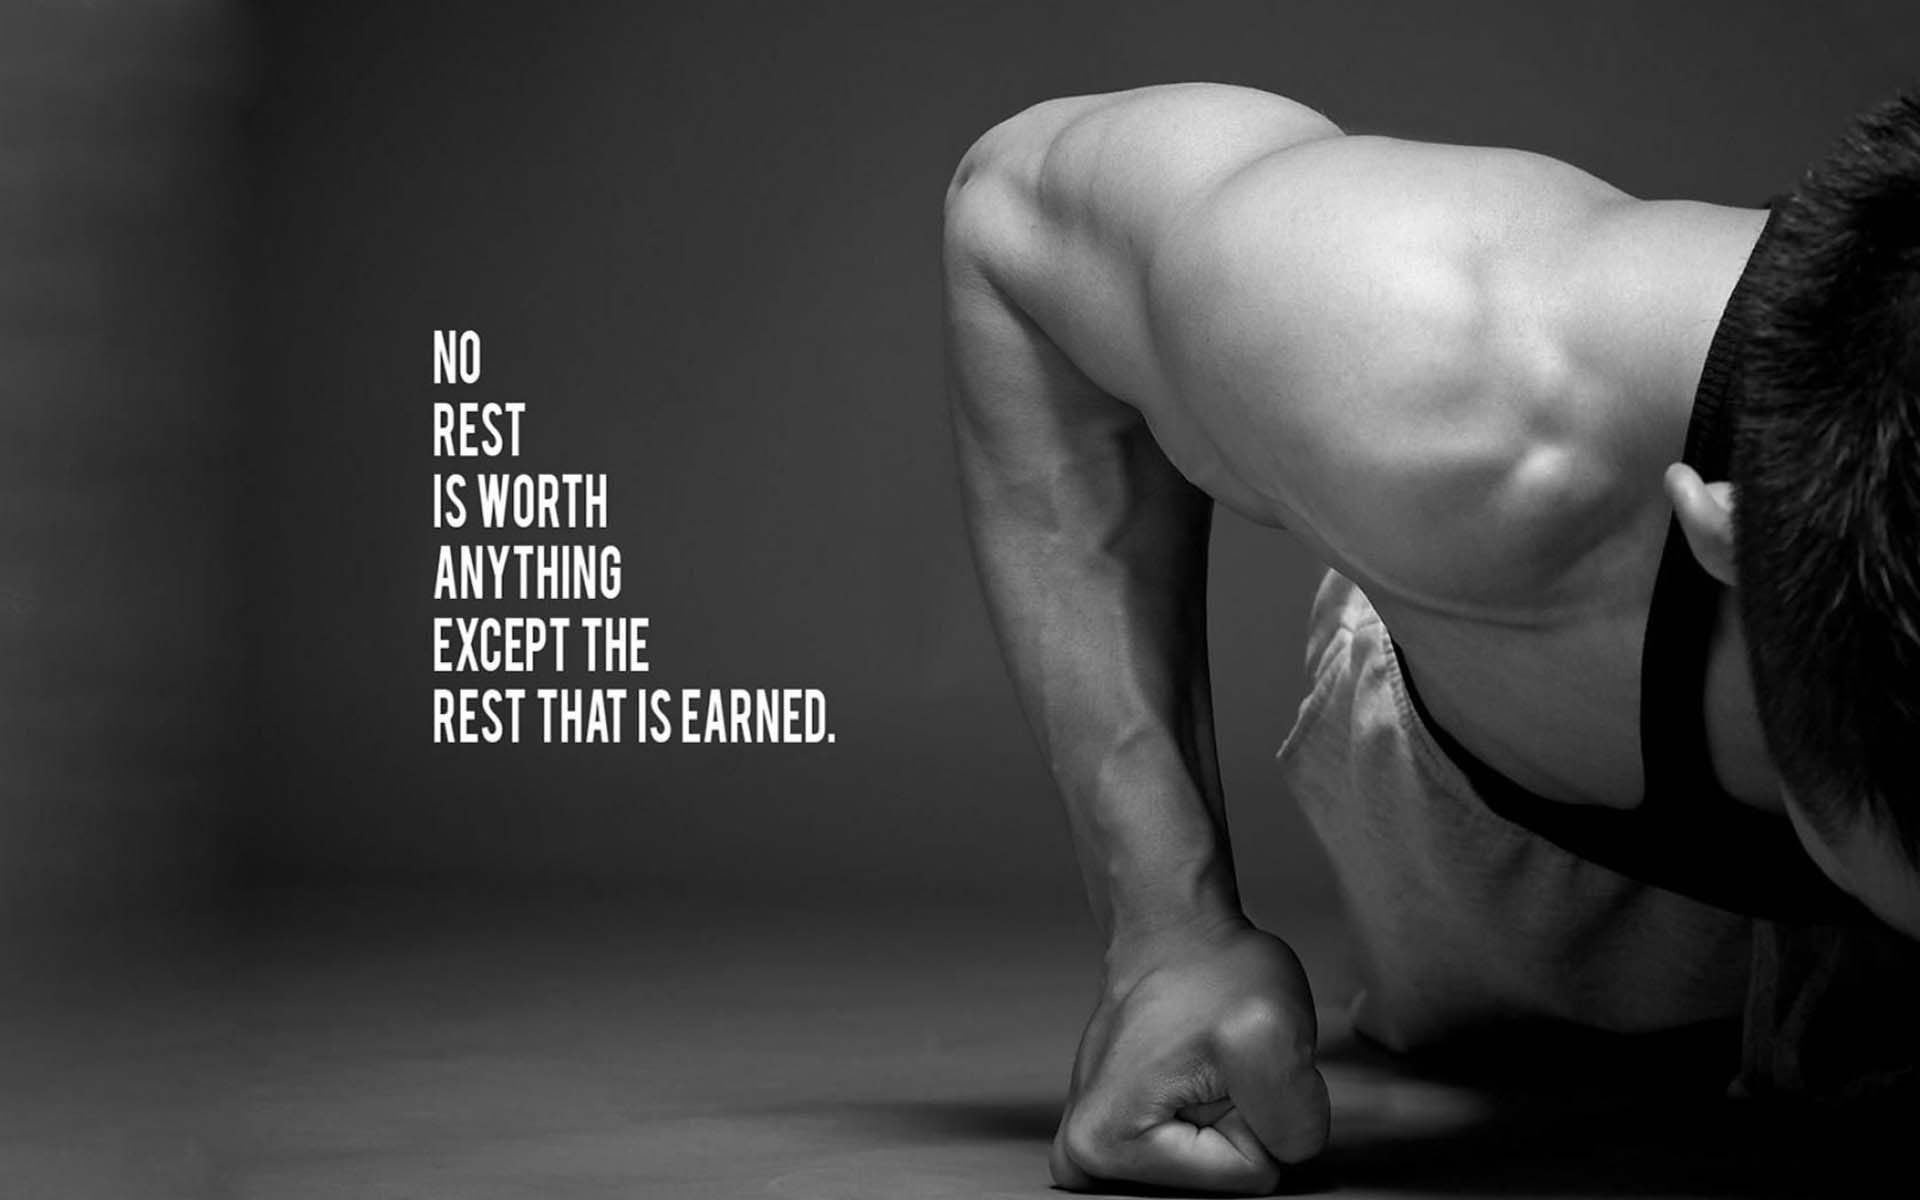 No Rest Is Worth Anything. HD Motivation Wallpaper for Mobile and Desktop